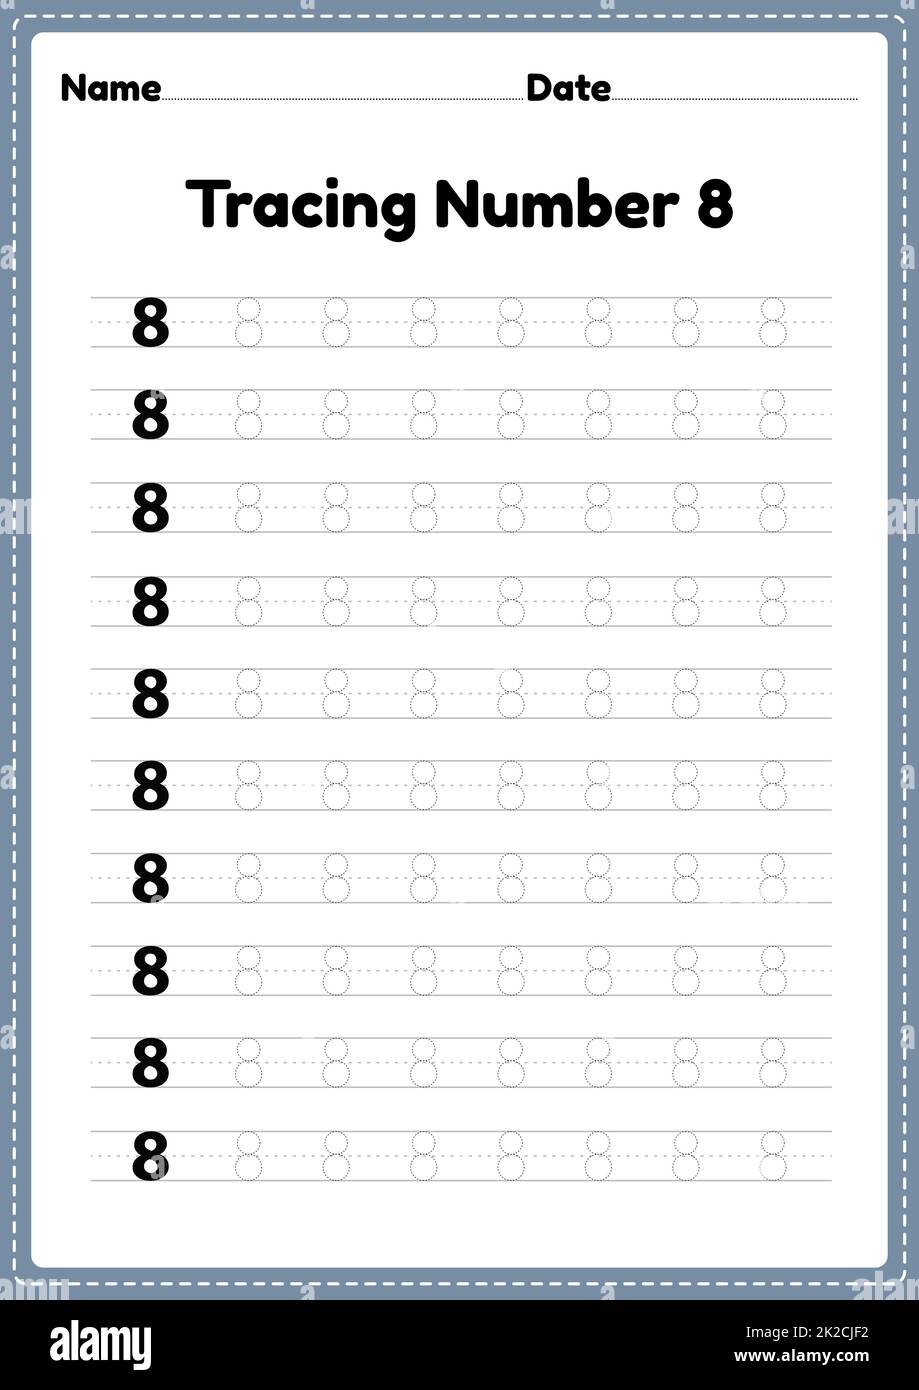 Tracing number 8 worksheet for kindergarten and preschool kids for educational handwriting practice in a printable page. Stock Photo